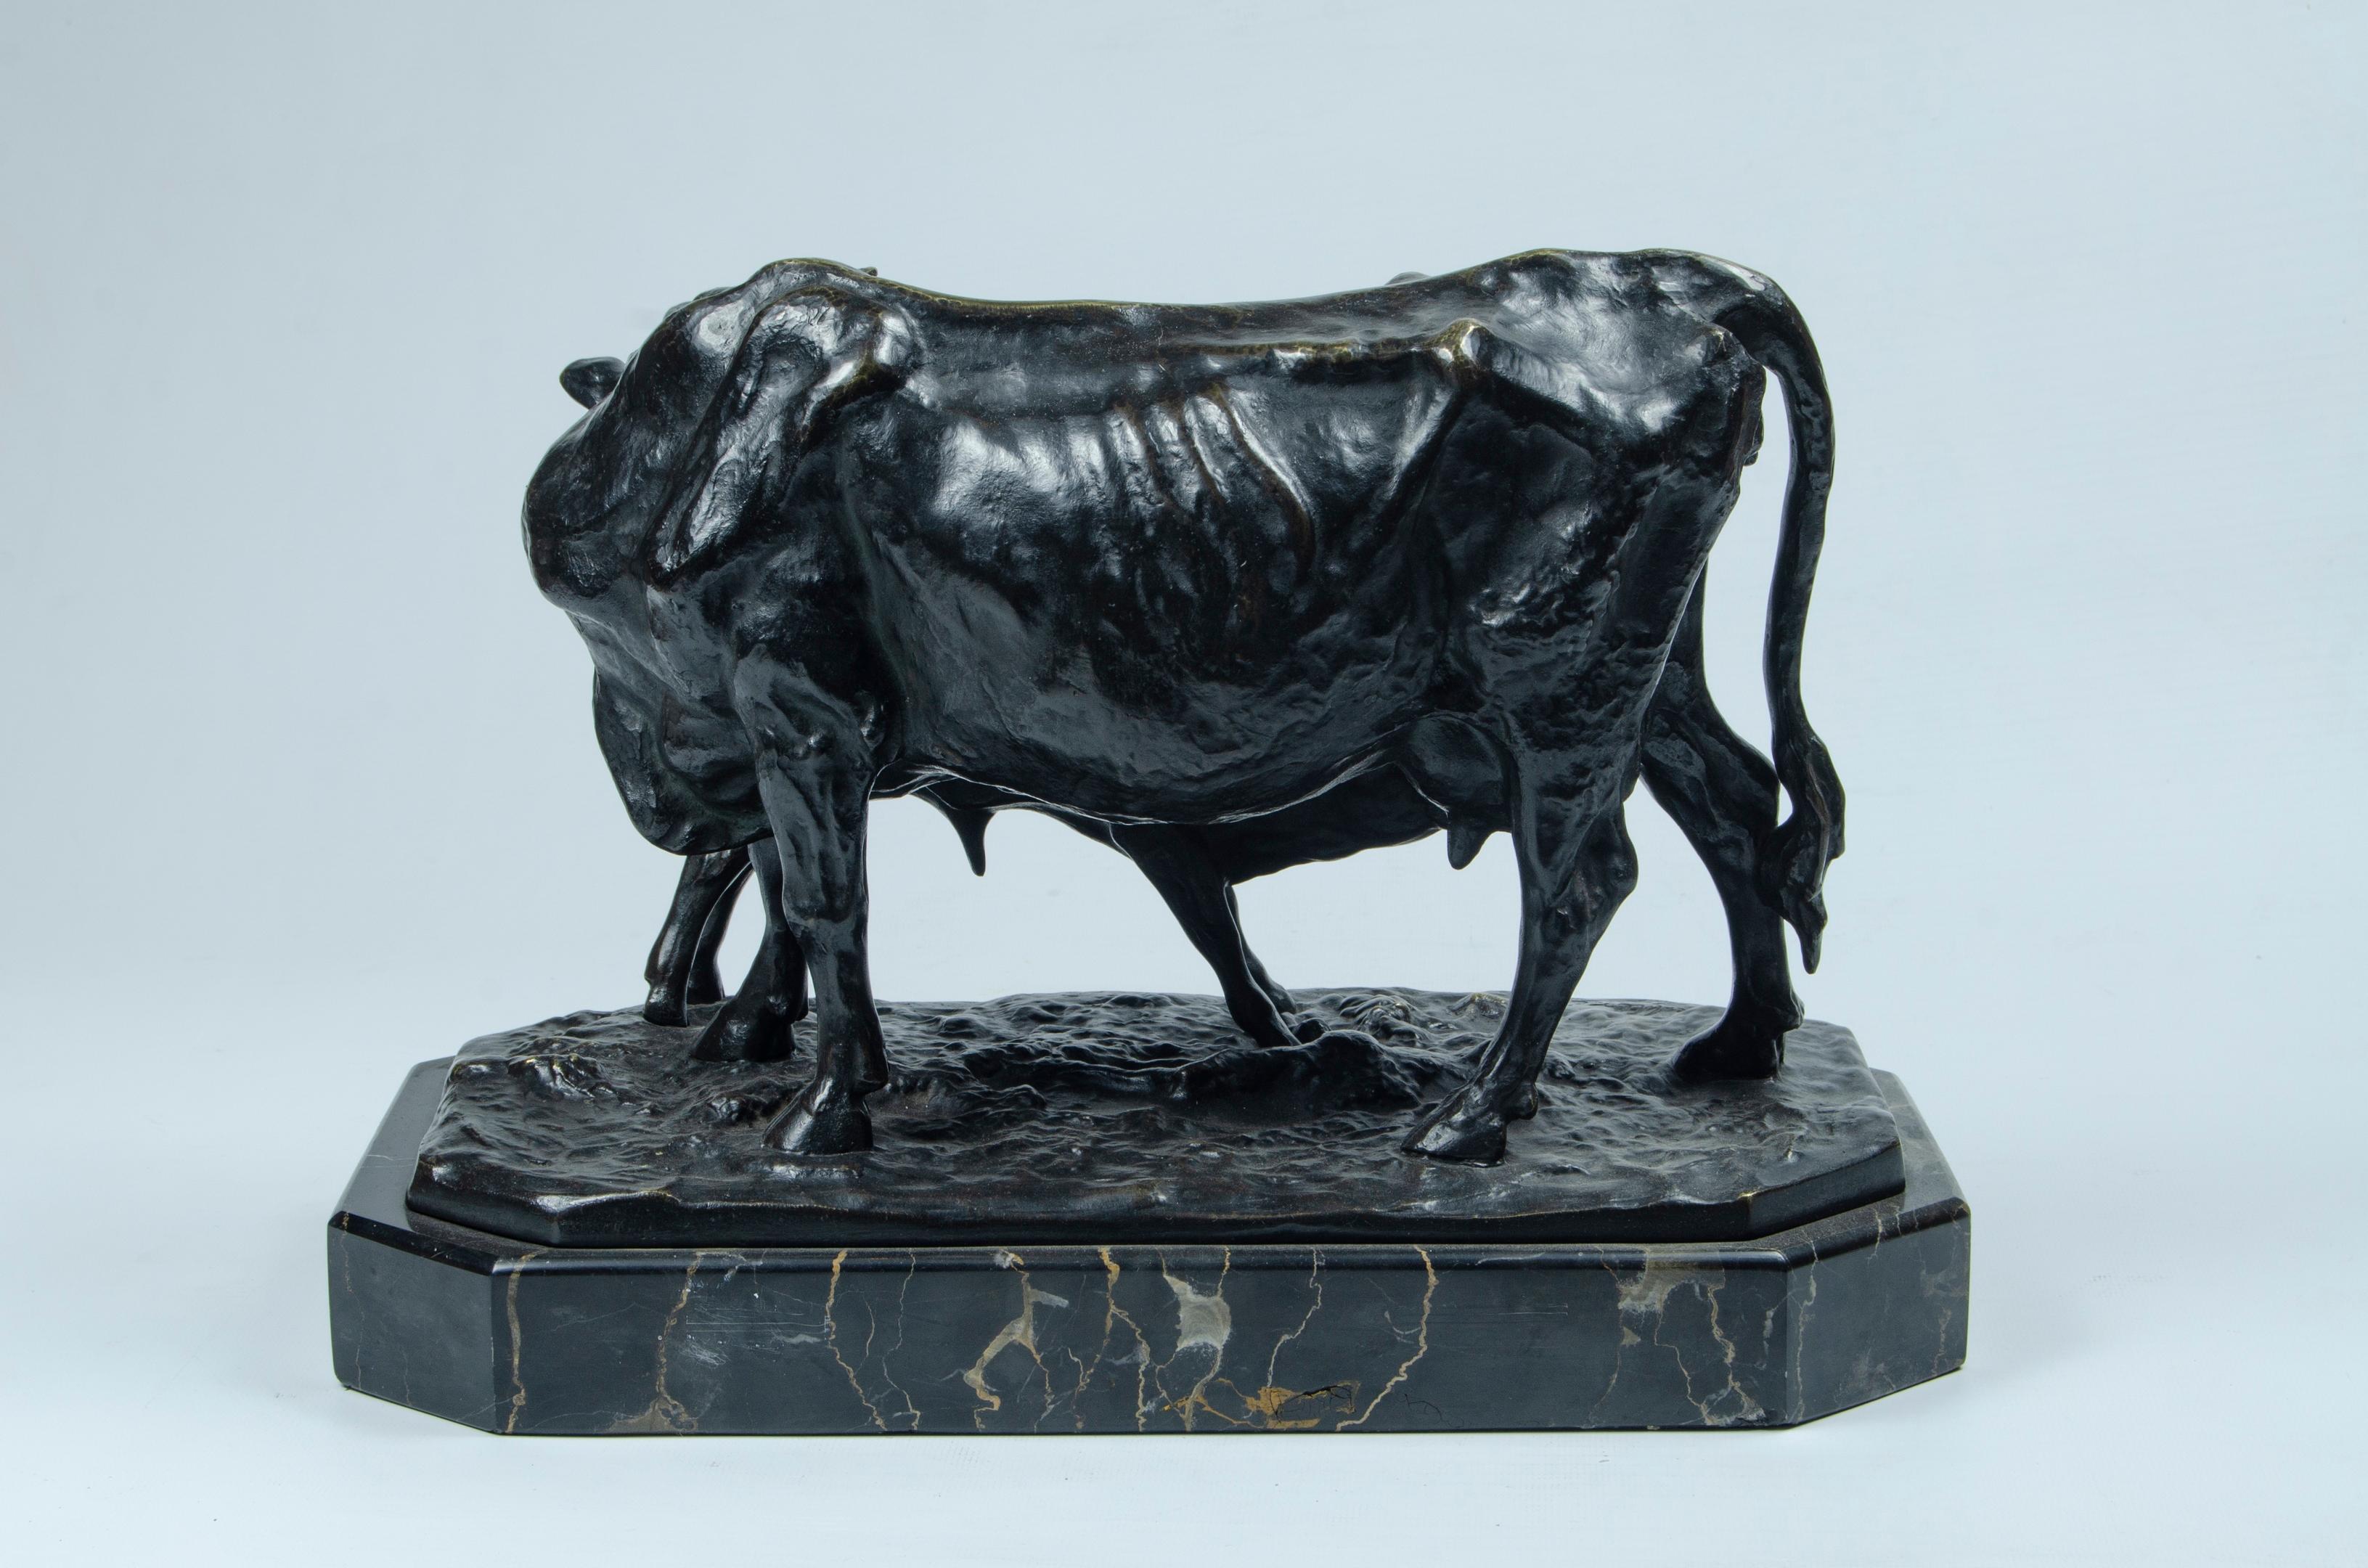 Bronze sculpture Flamenca cow
attributed to P.J Mene
nuanced black patina
signed on the base (metal)
portoro marble base
perfect condition
origin France, circa 1860.